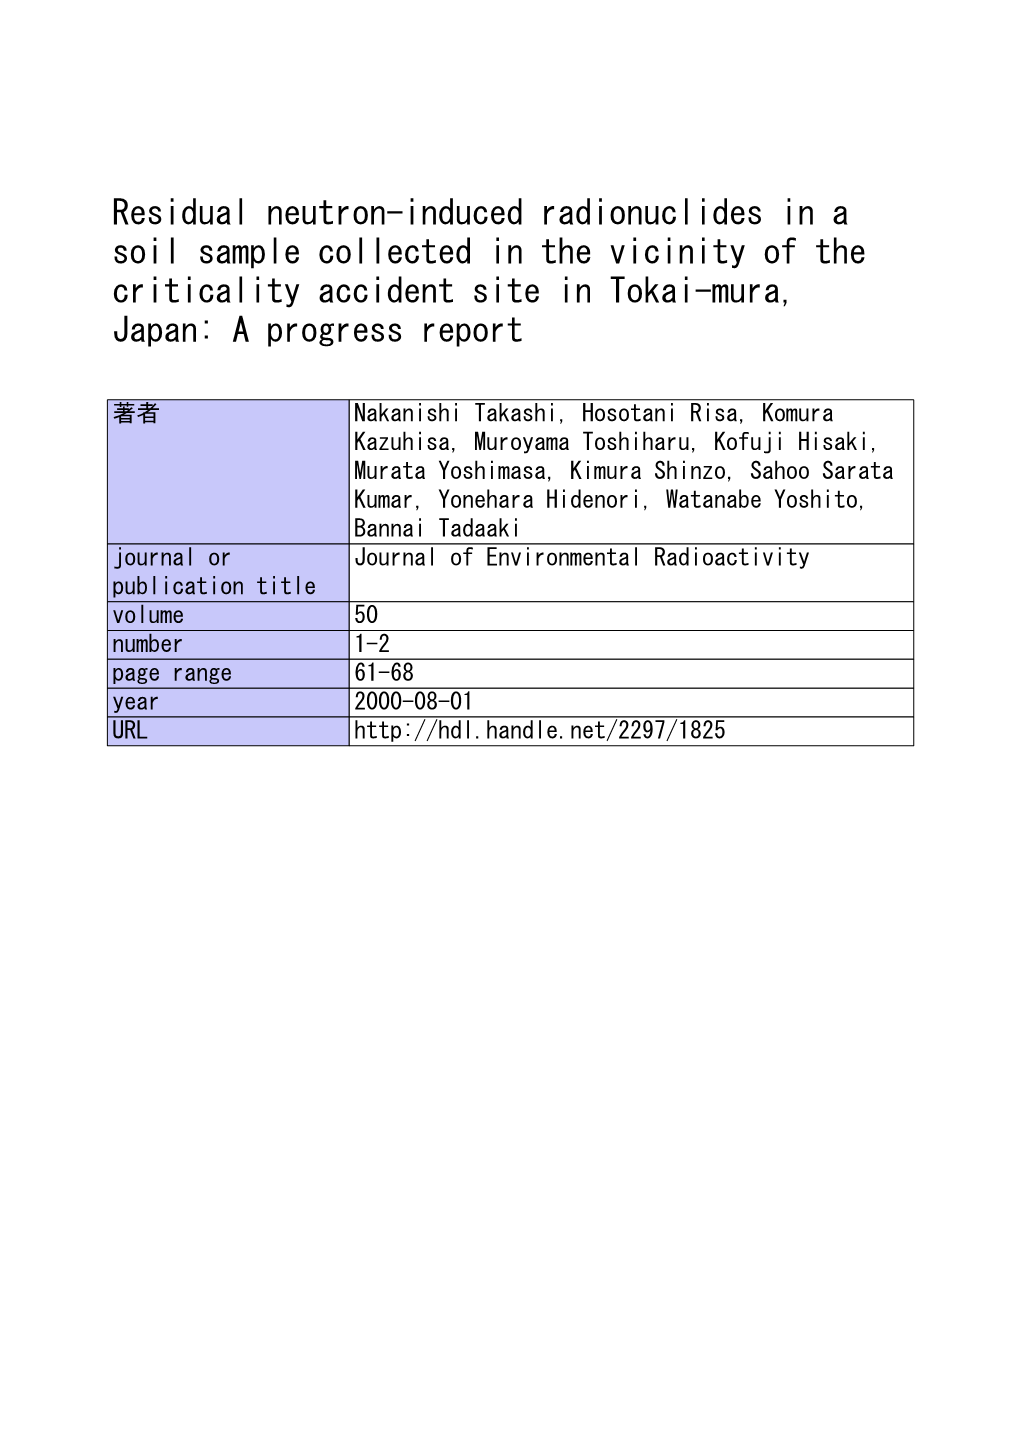 Residual Neutron-Induced Radionuclides in a Soil Sample Collected in the Vicinity of the Criticality Accident Site in Tokai-Mura, Japan: a Progress Report